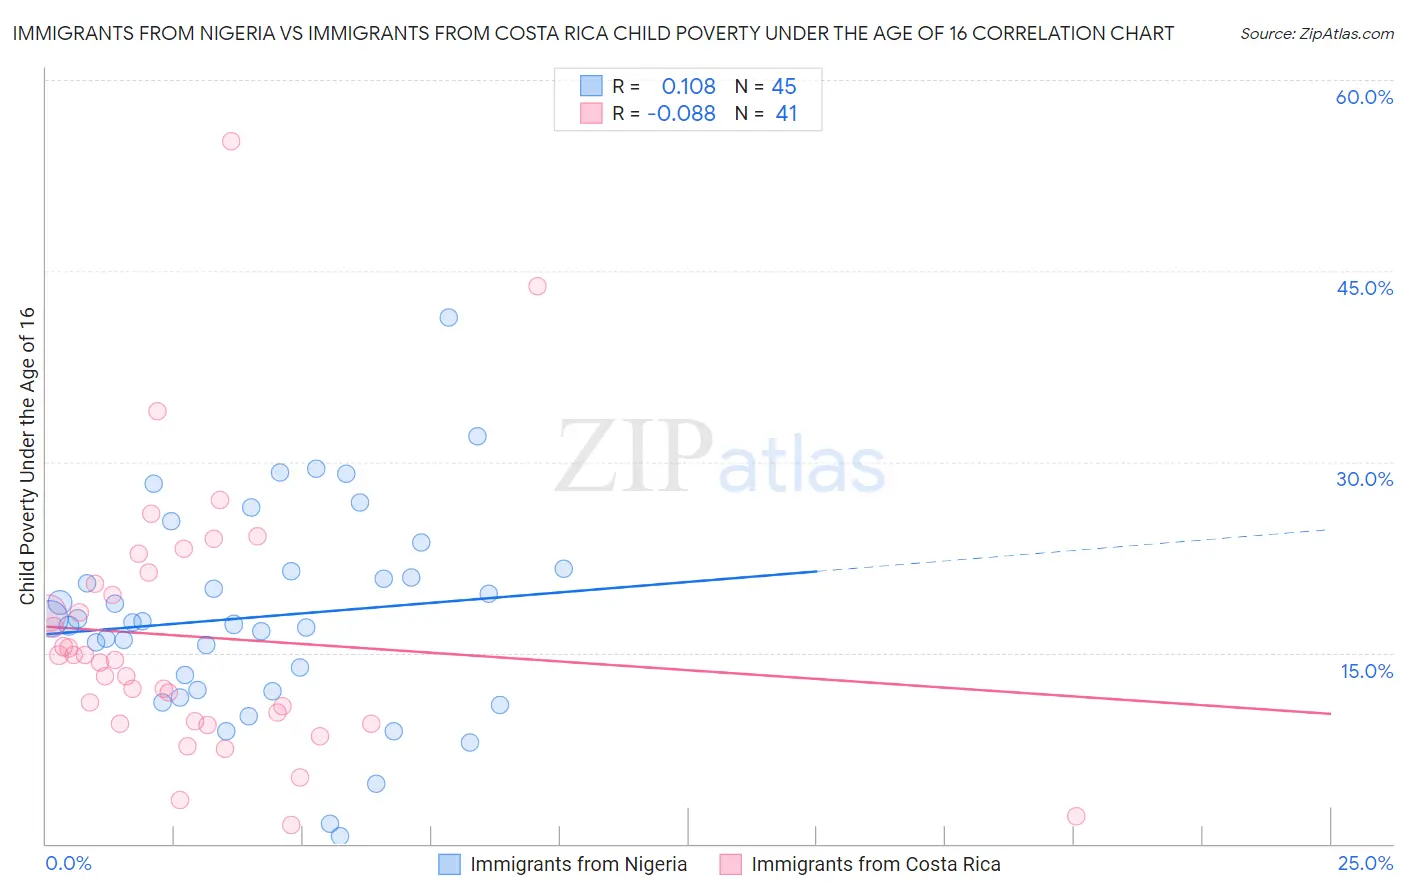 Immigrants from Nigeria vs Immigrants from Costa Rica Child Poverty Under the Age of 16